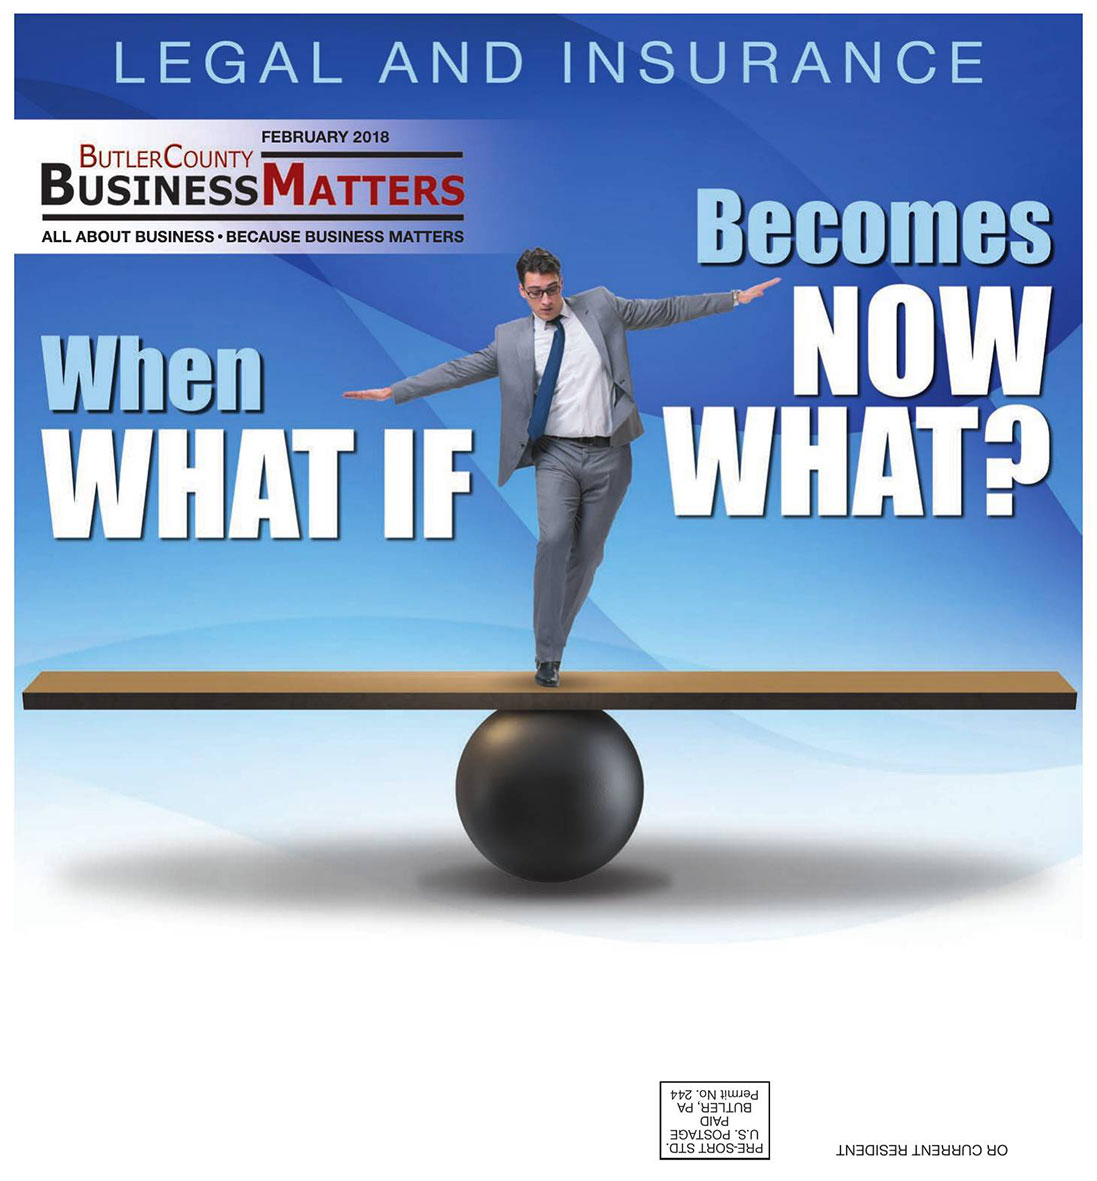 February 2018 - Legal and Insurance - When What If Becomes Now What?